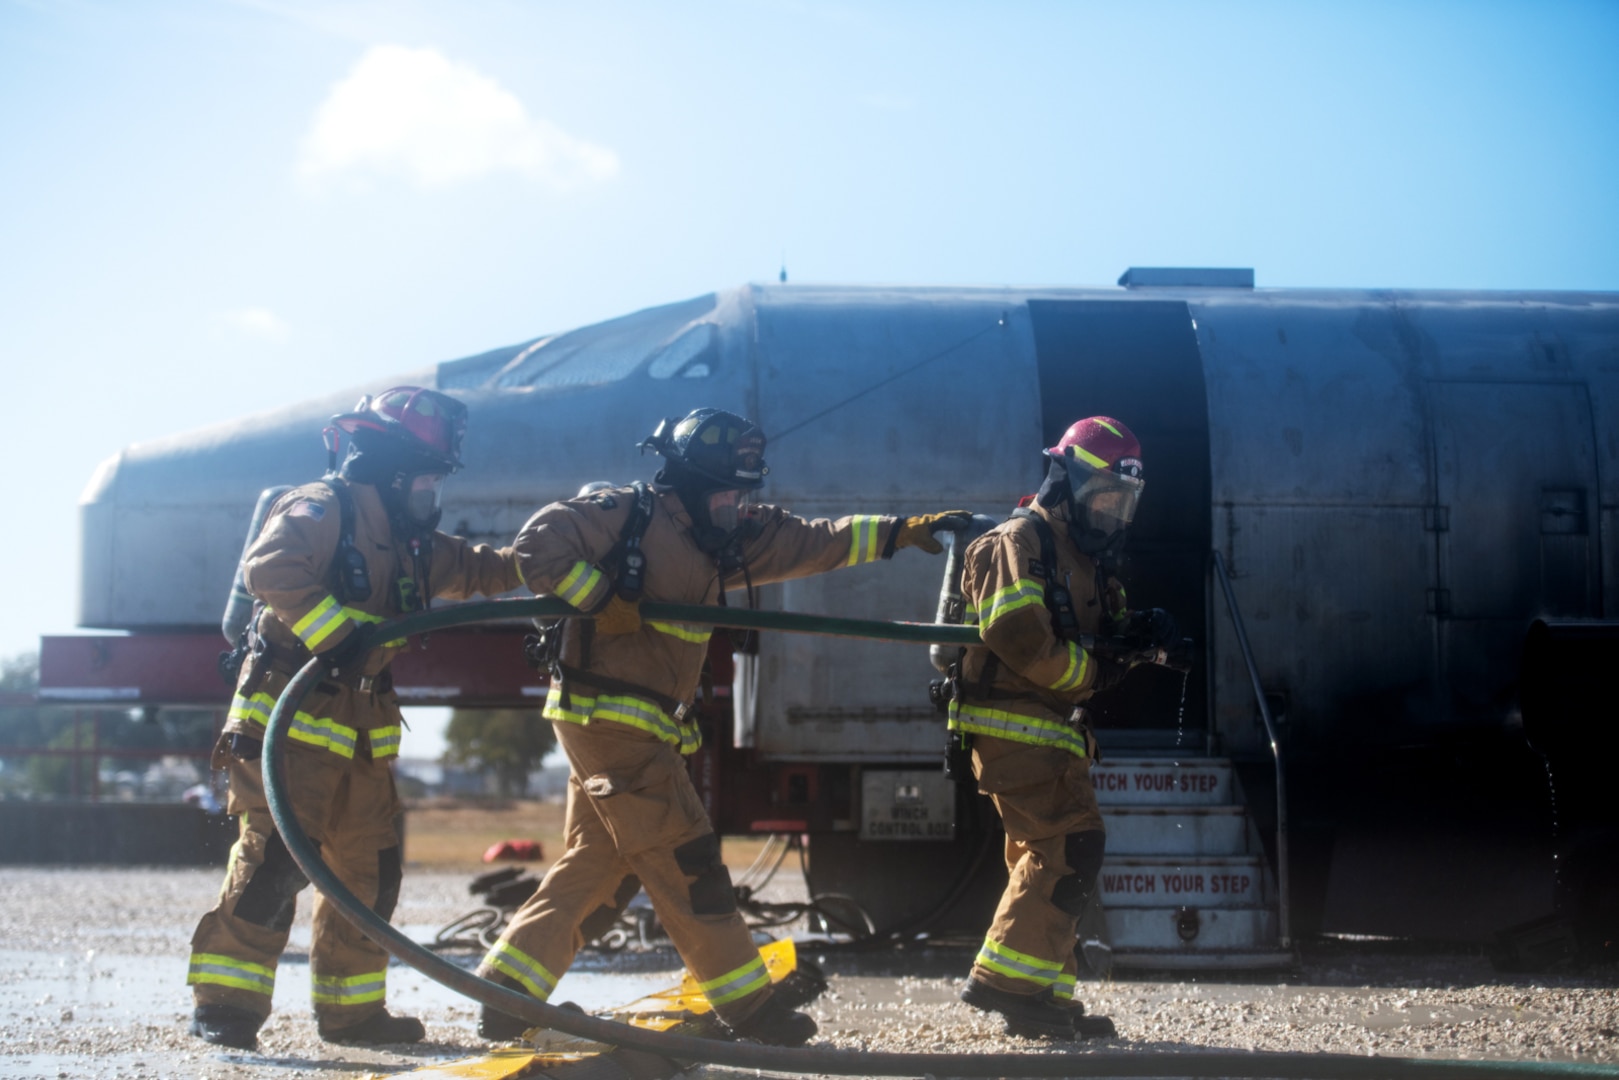 Firefighters with Joint Base San Antonio extinguish an isolated fire during a live fire Aircraft Rescue Fire Fighting training Nov. 20, 2020, at Joint Base San Antonio-Lackland Kelly Field Annex.